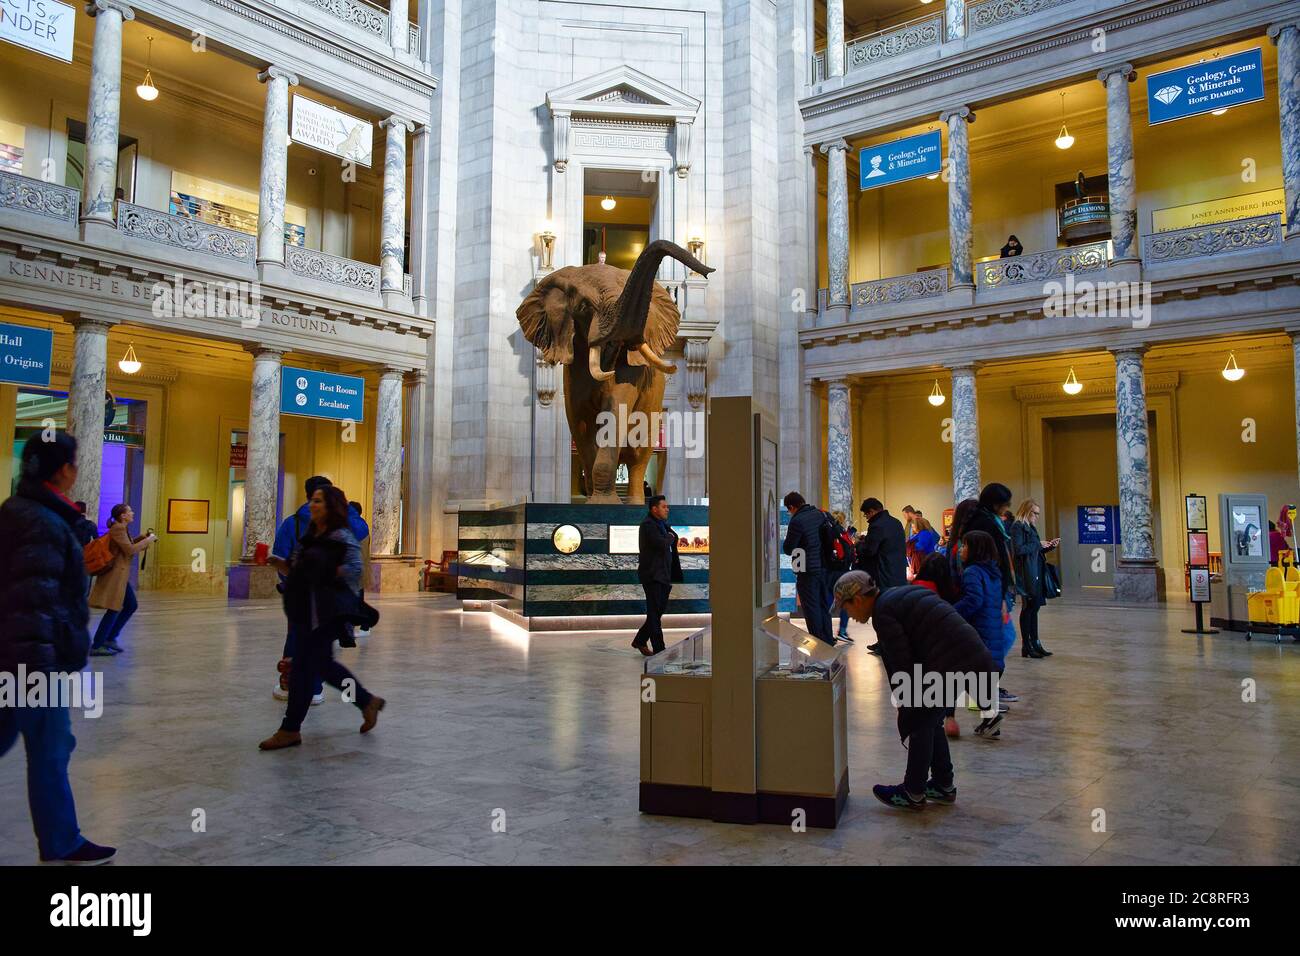 Visitors in the Smithsonian National Museum of Natural History, Washington, D.C. Stock Photo